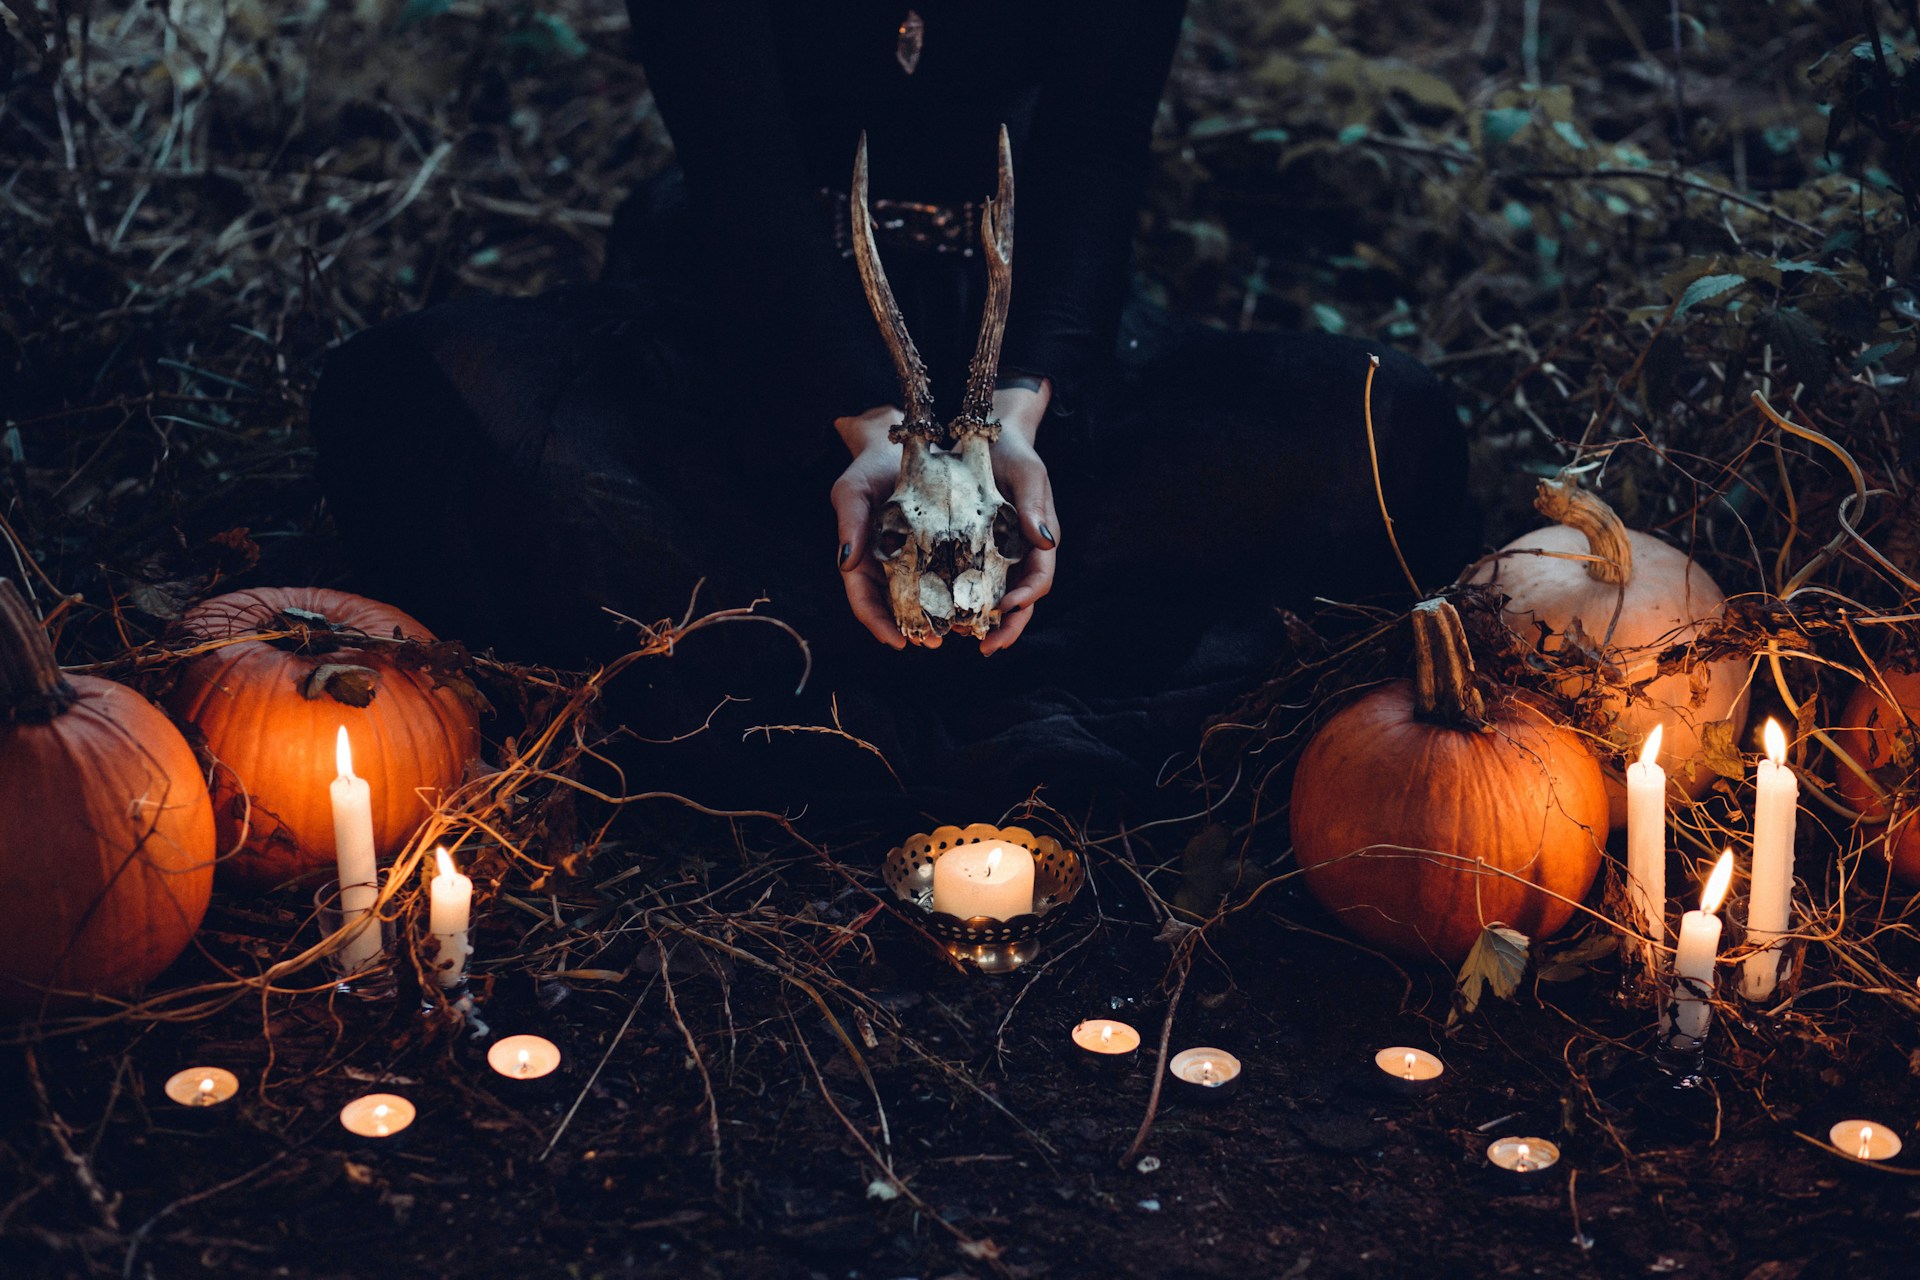 Person in black holding an animal skull surrounded by pumpkins and candles